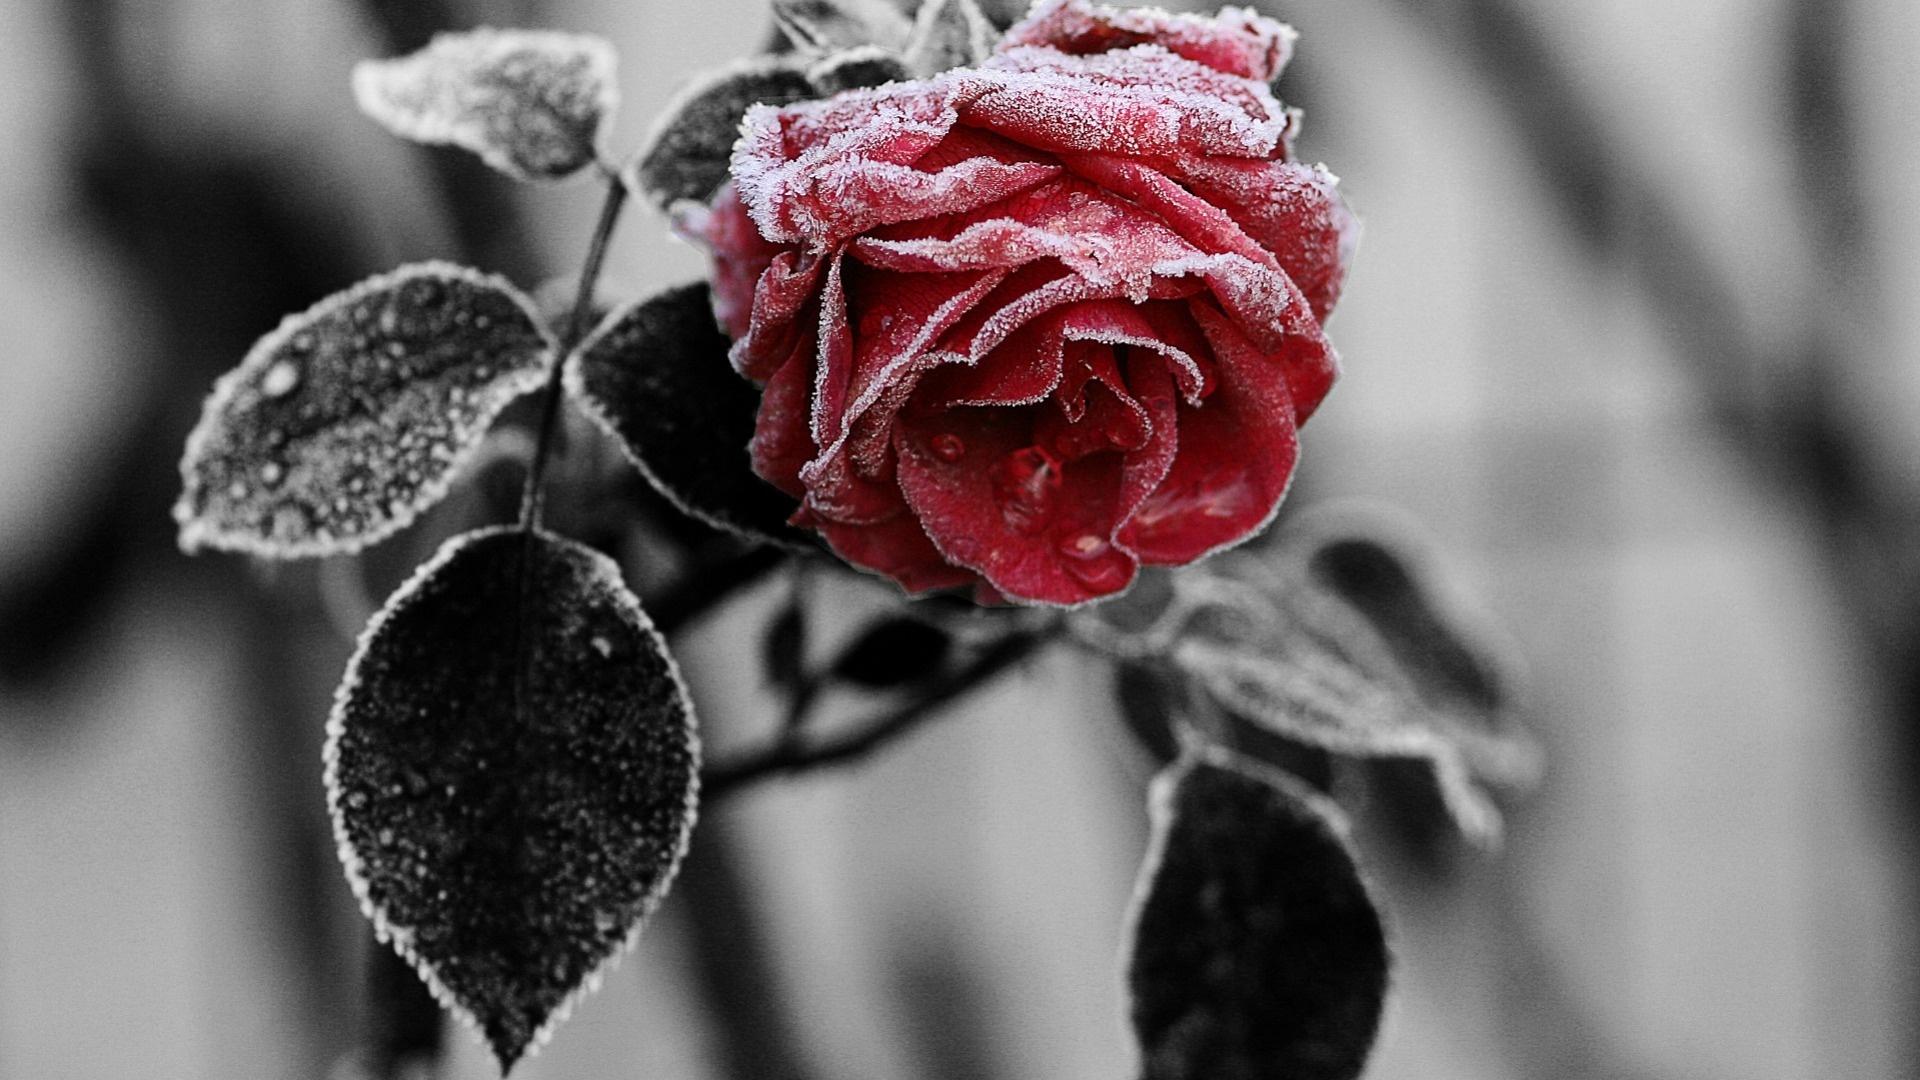 Wallpaper. Flowers. photo. picture. photo, winter, flower